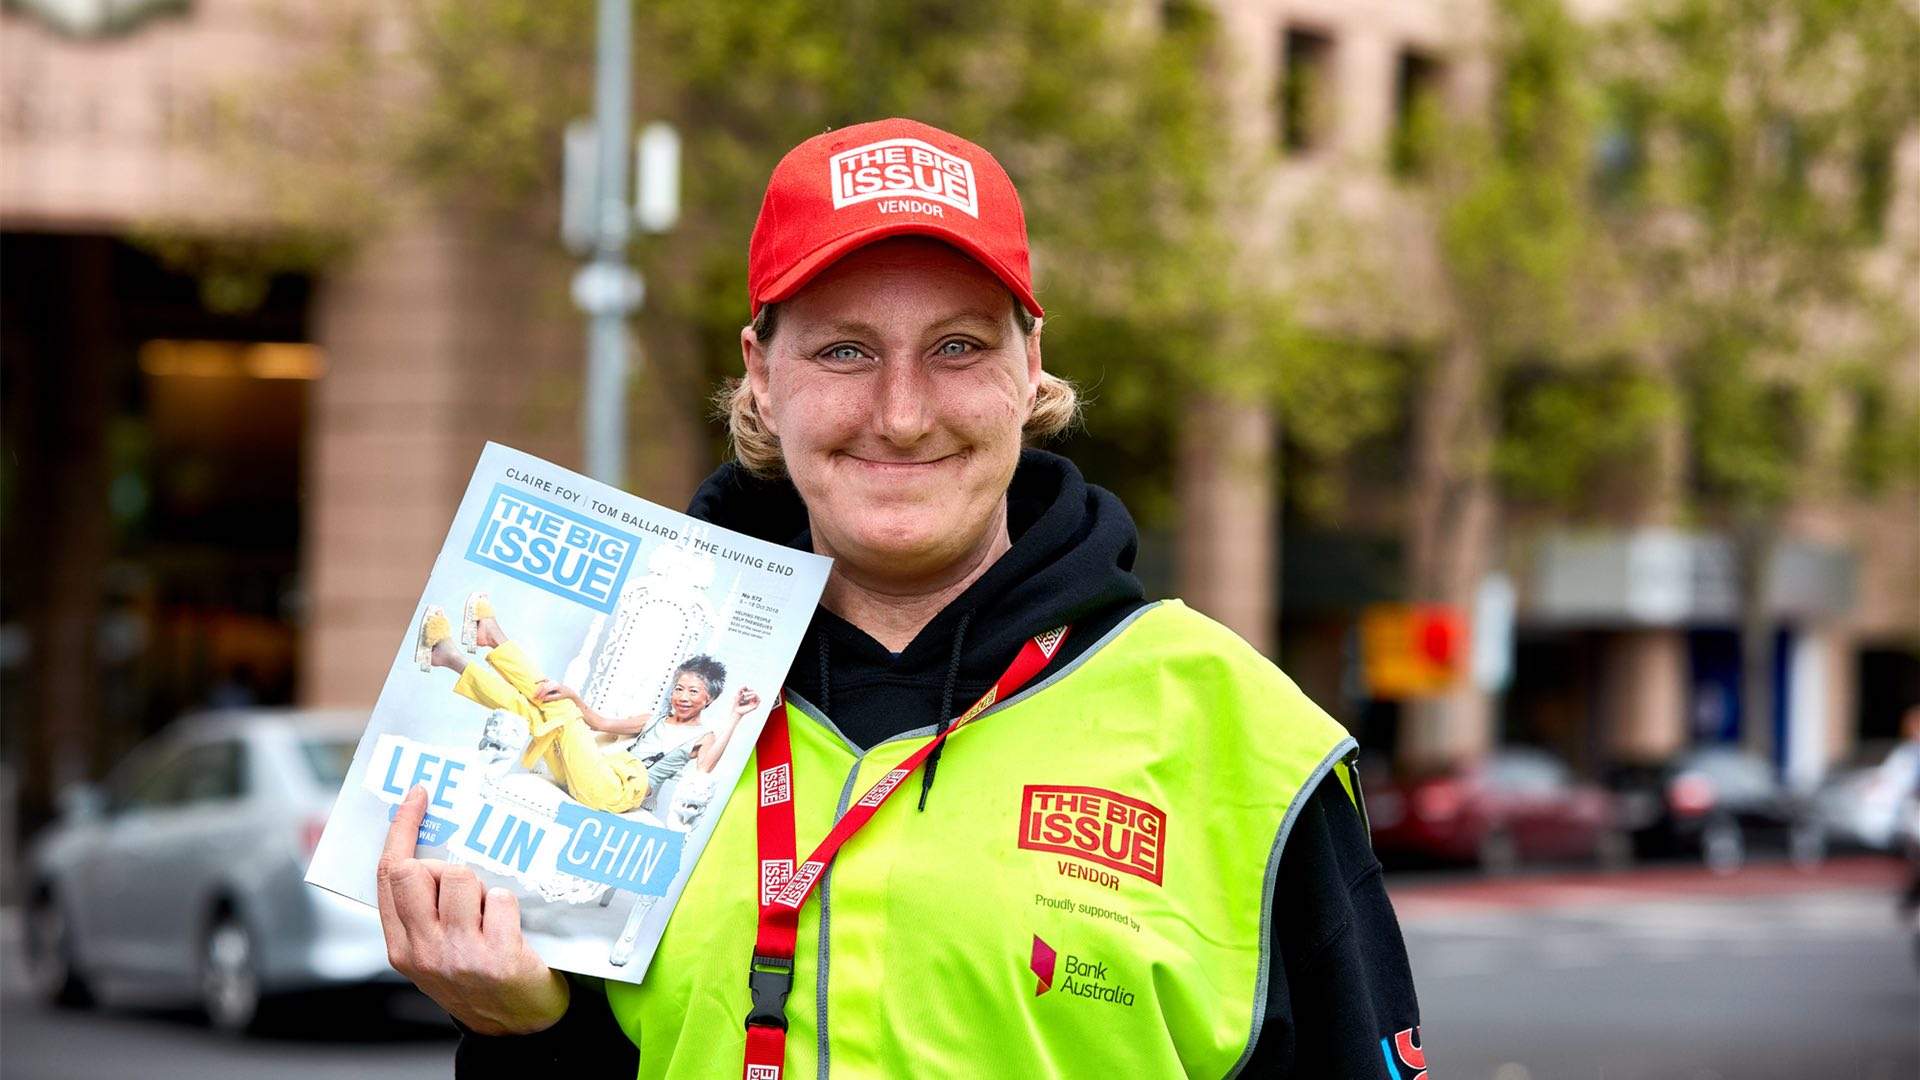 You Can Now Pay for Your Copy of 'The Big Issue' Simply by Tapping Your Card